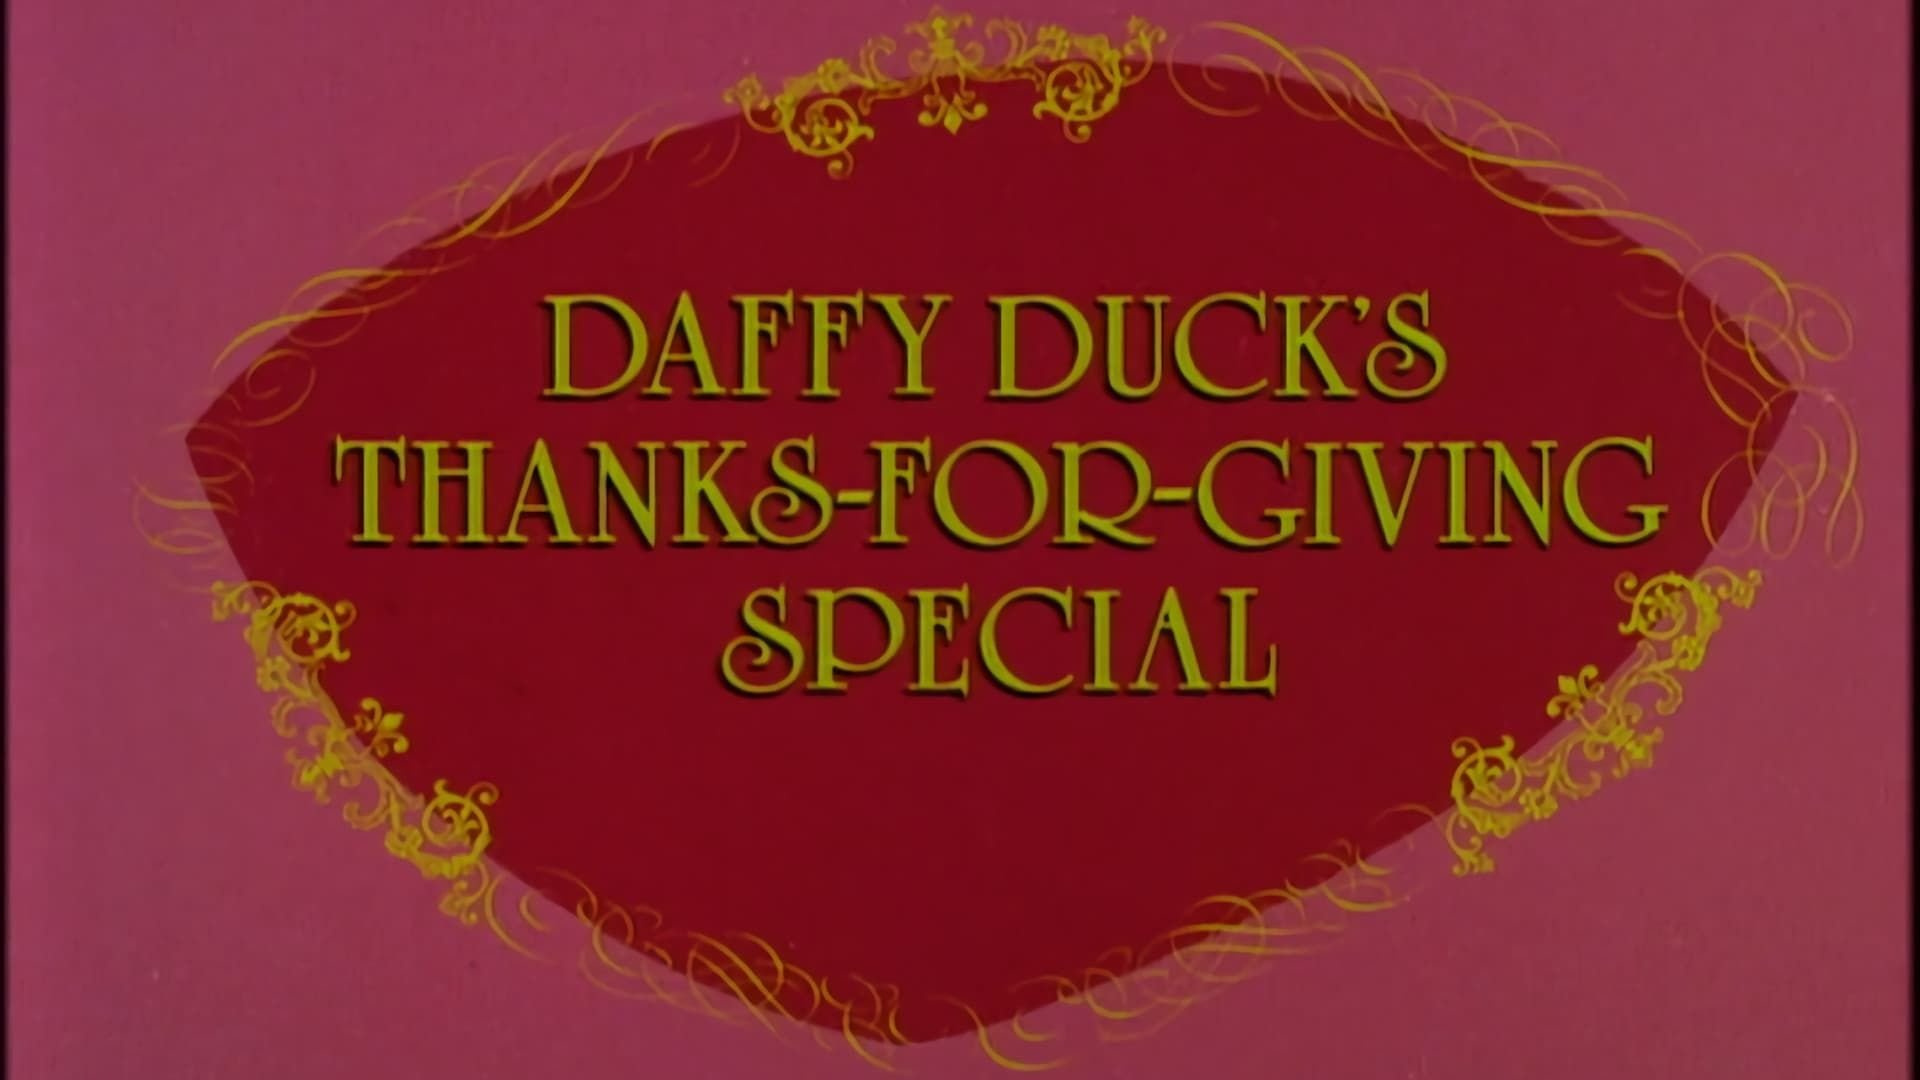 Daffy Duck's Thanks-for-Giving Special background